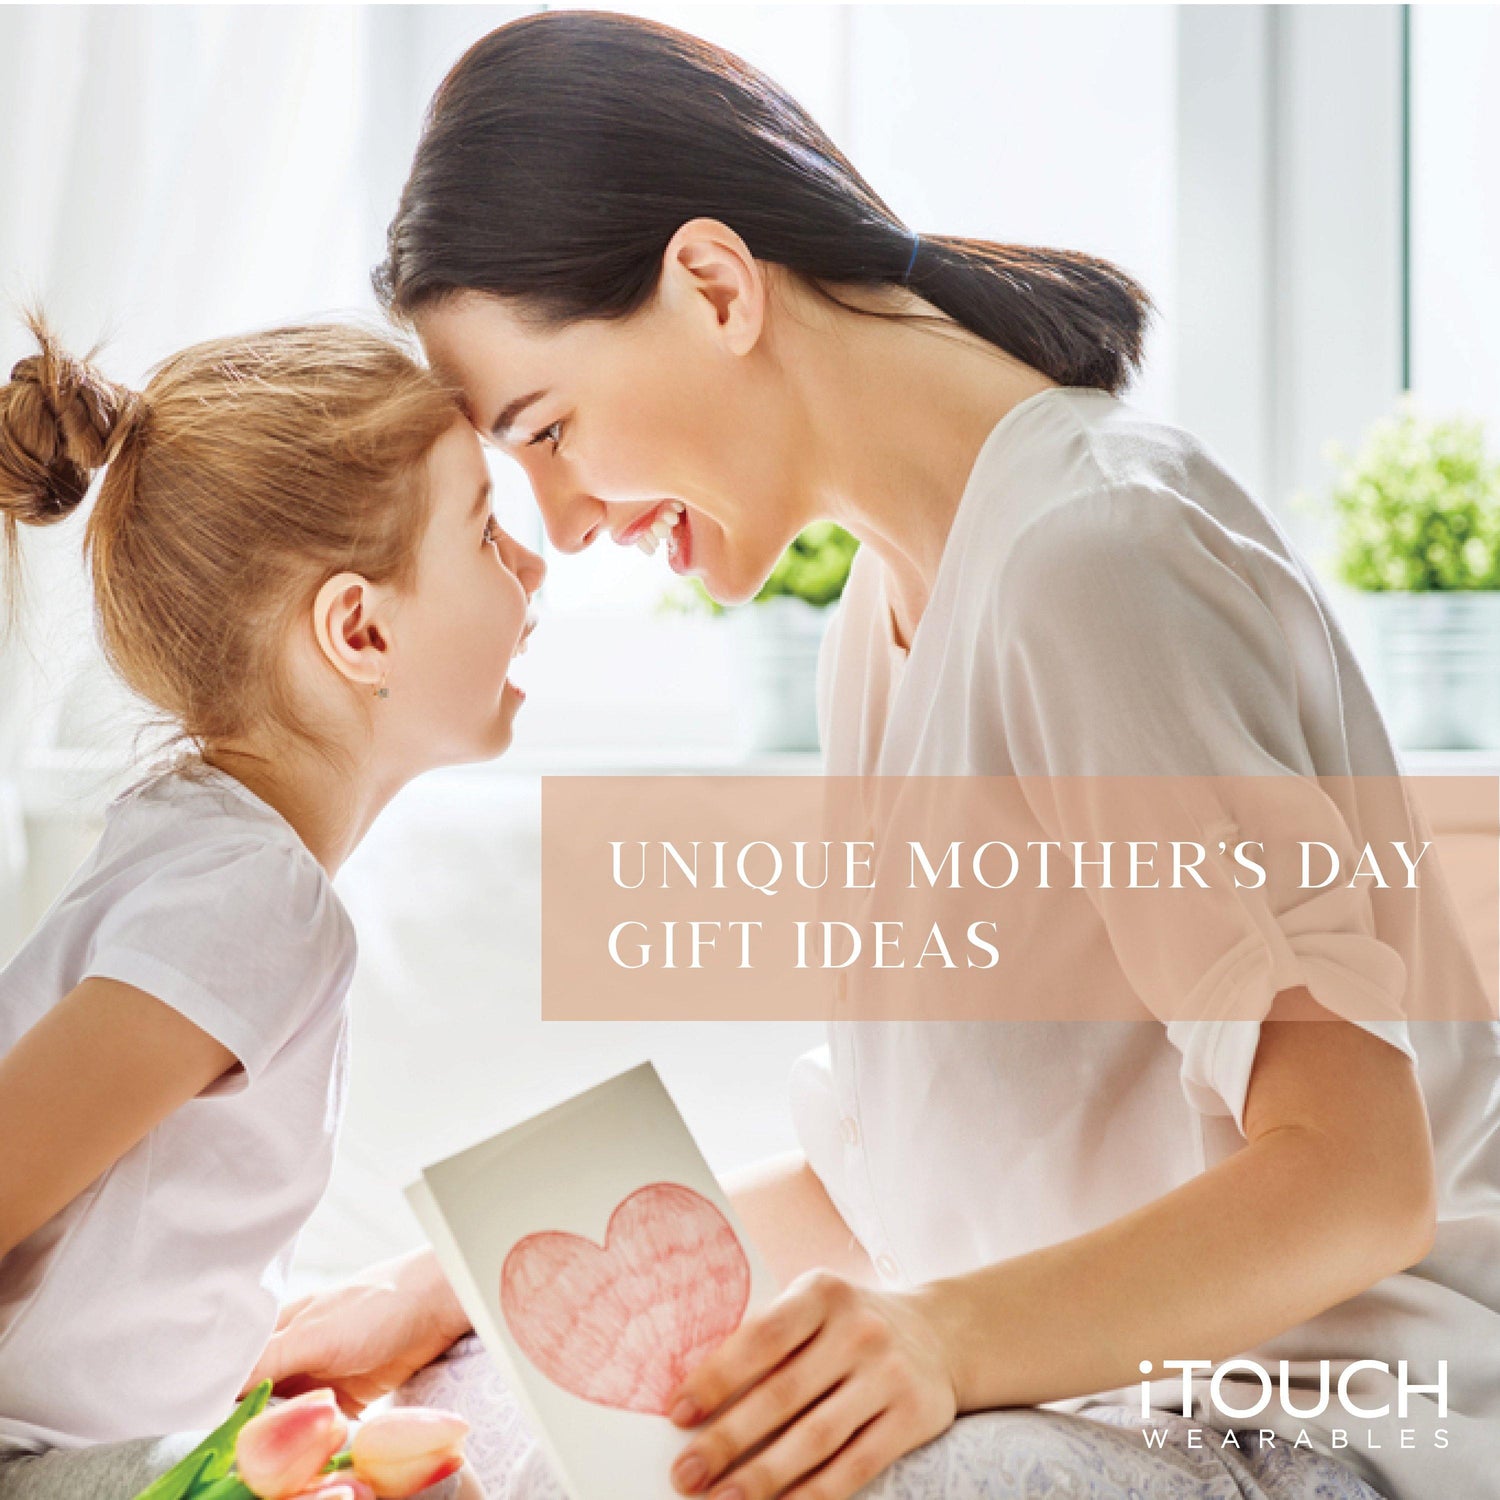 Unique Mother's Day Gift Ideas - iTOUCH Wearables